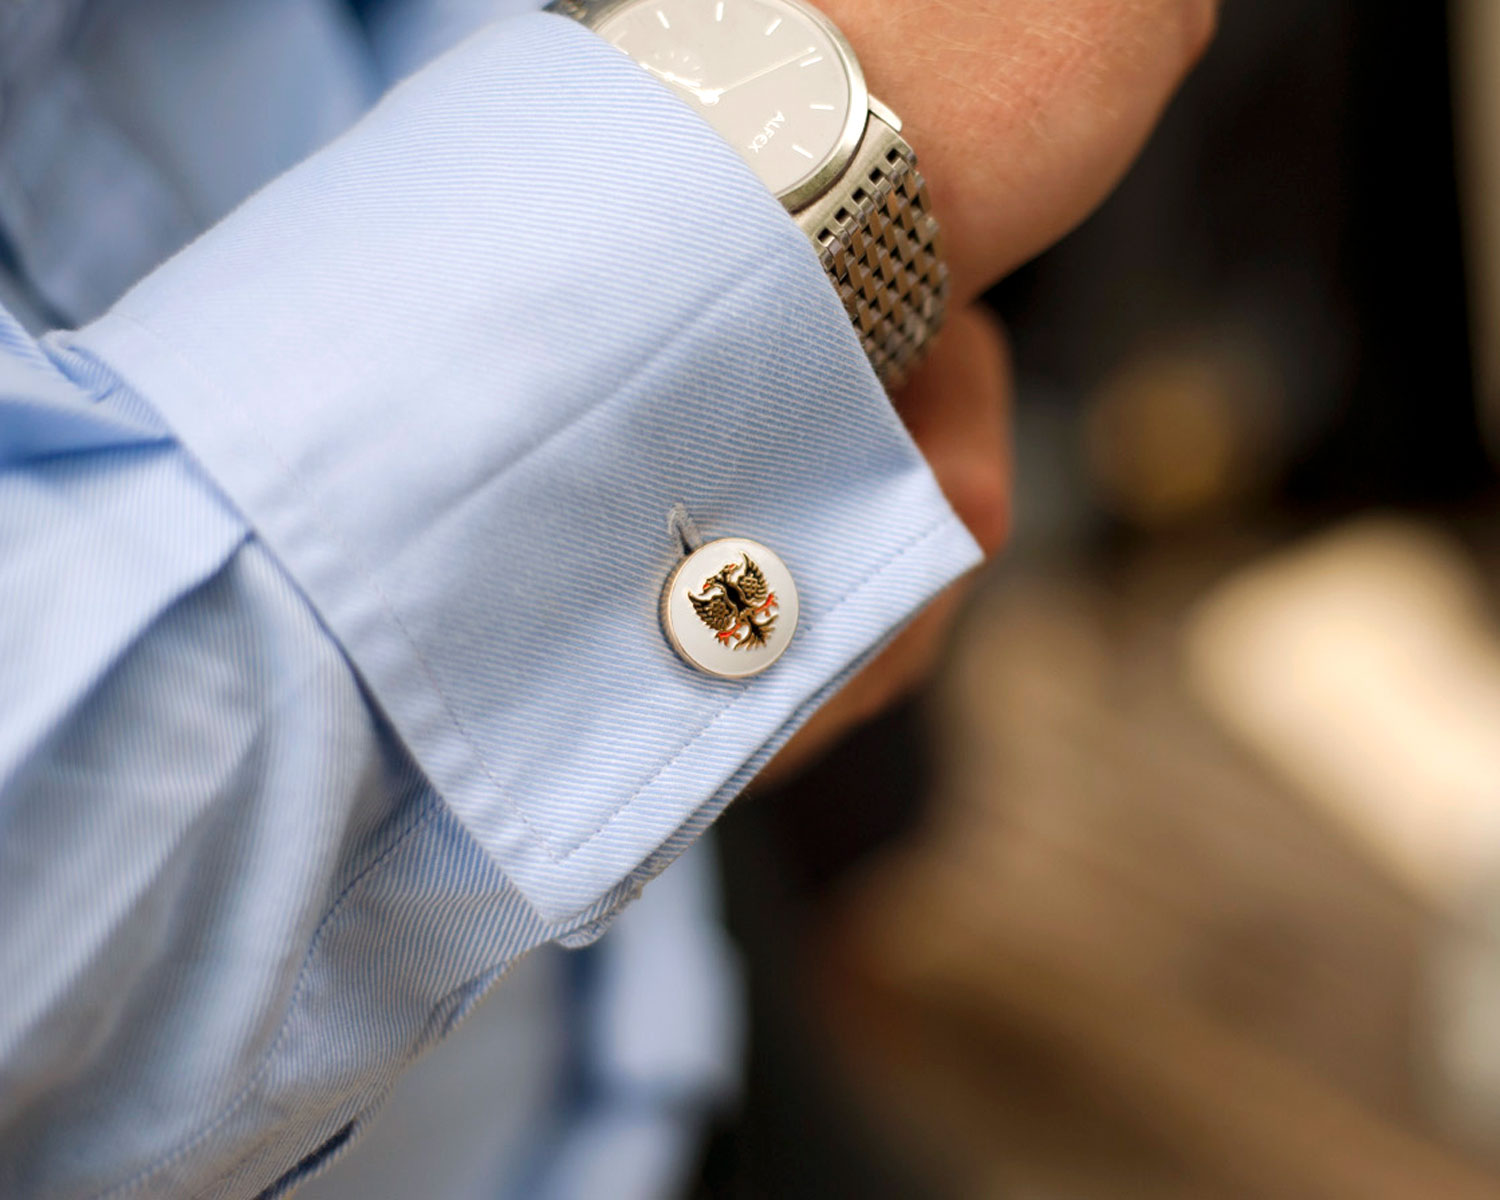 Wimbledon Cufflink Company Offers Personalized Cufflinks for the Modern Gentleman in the UK